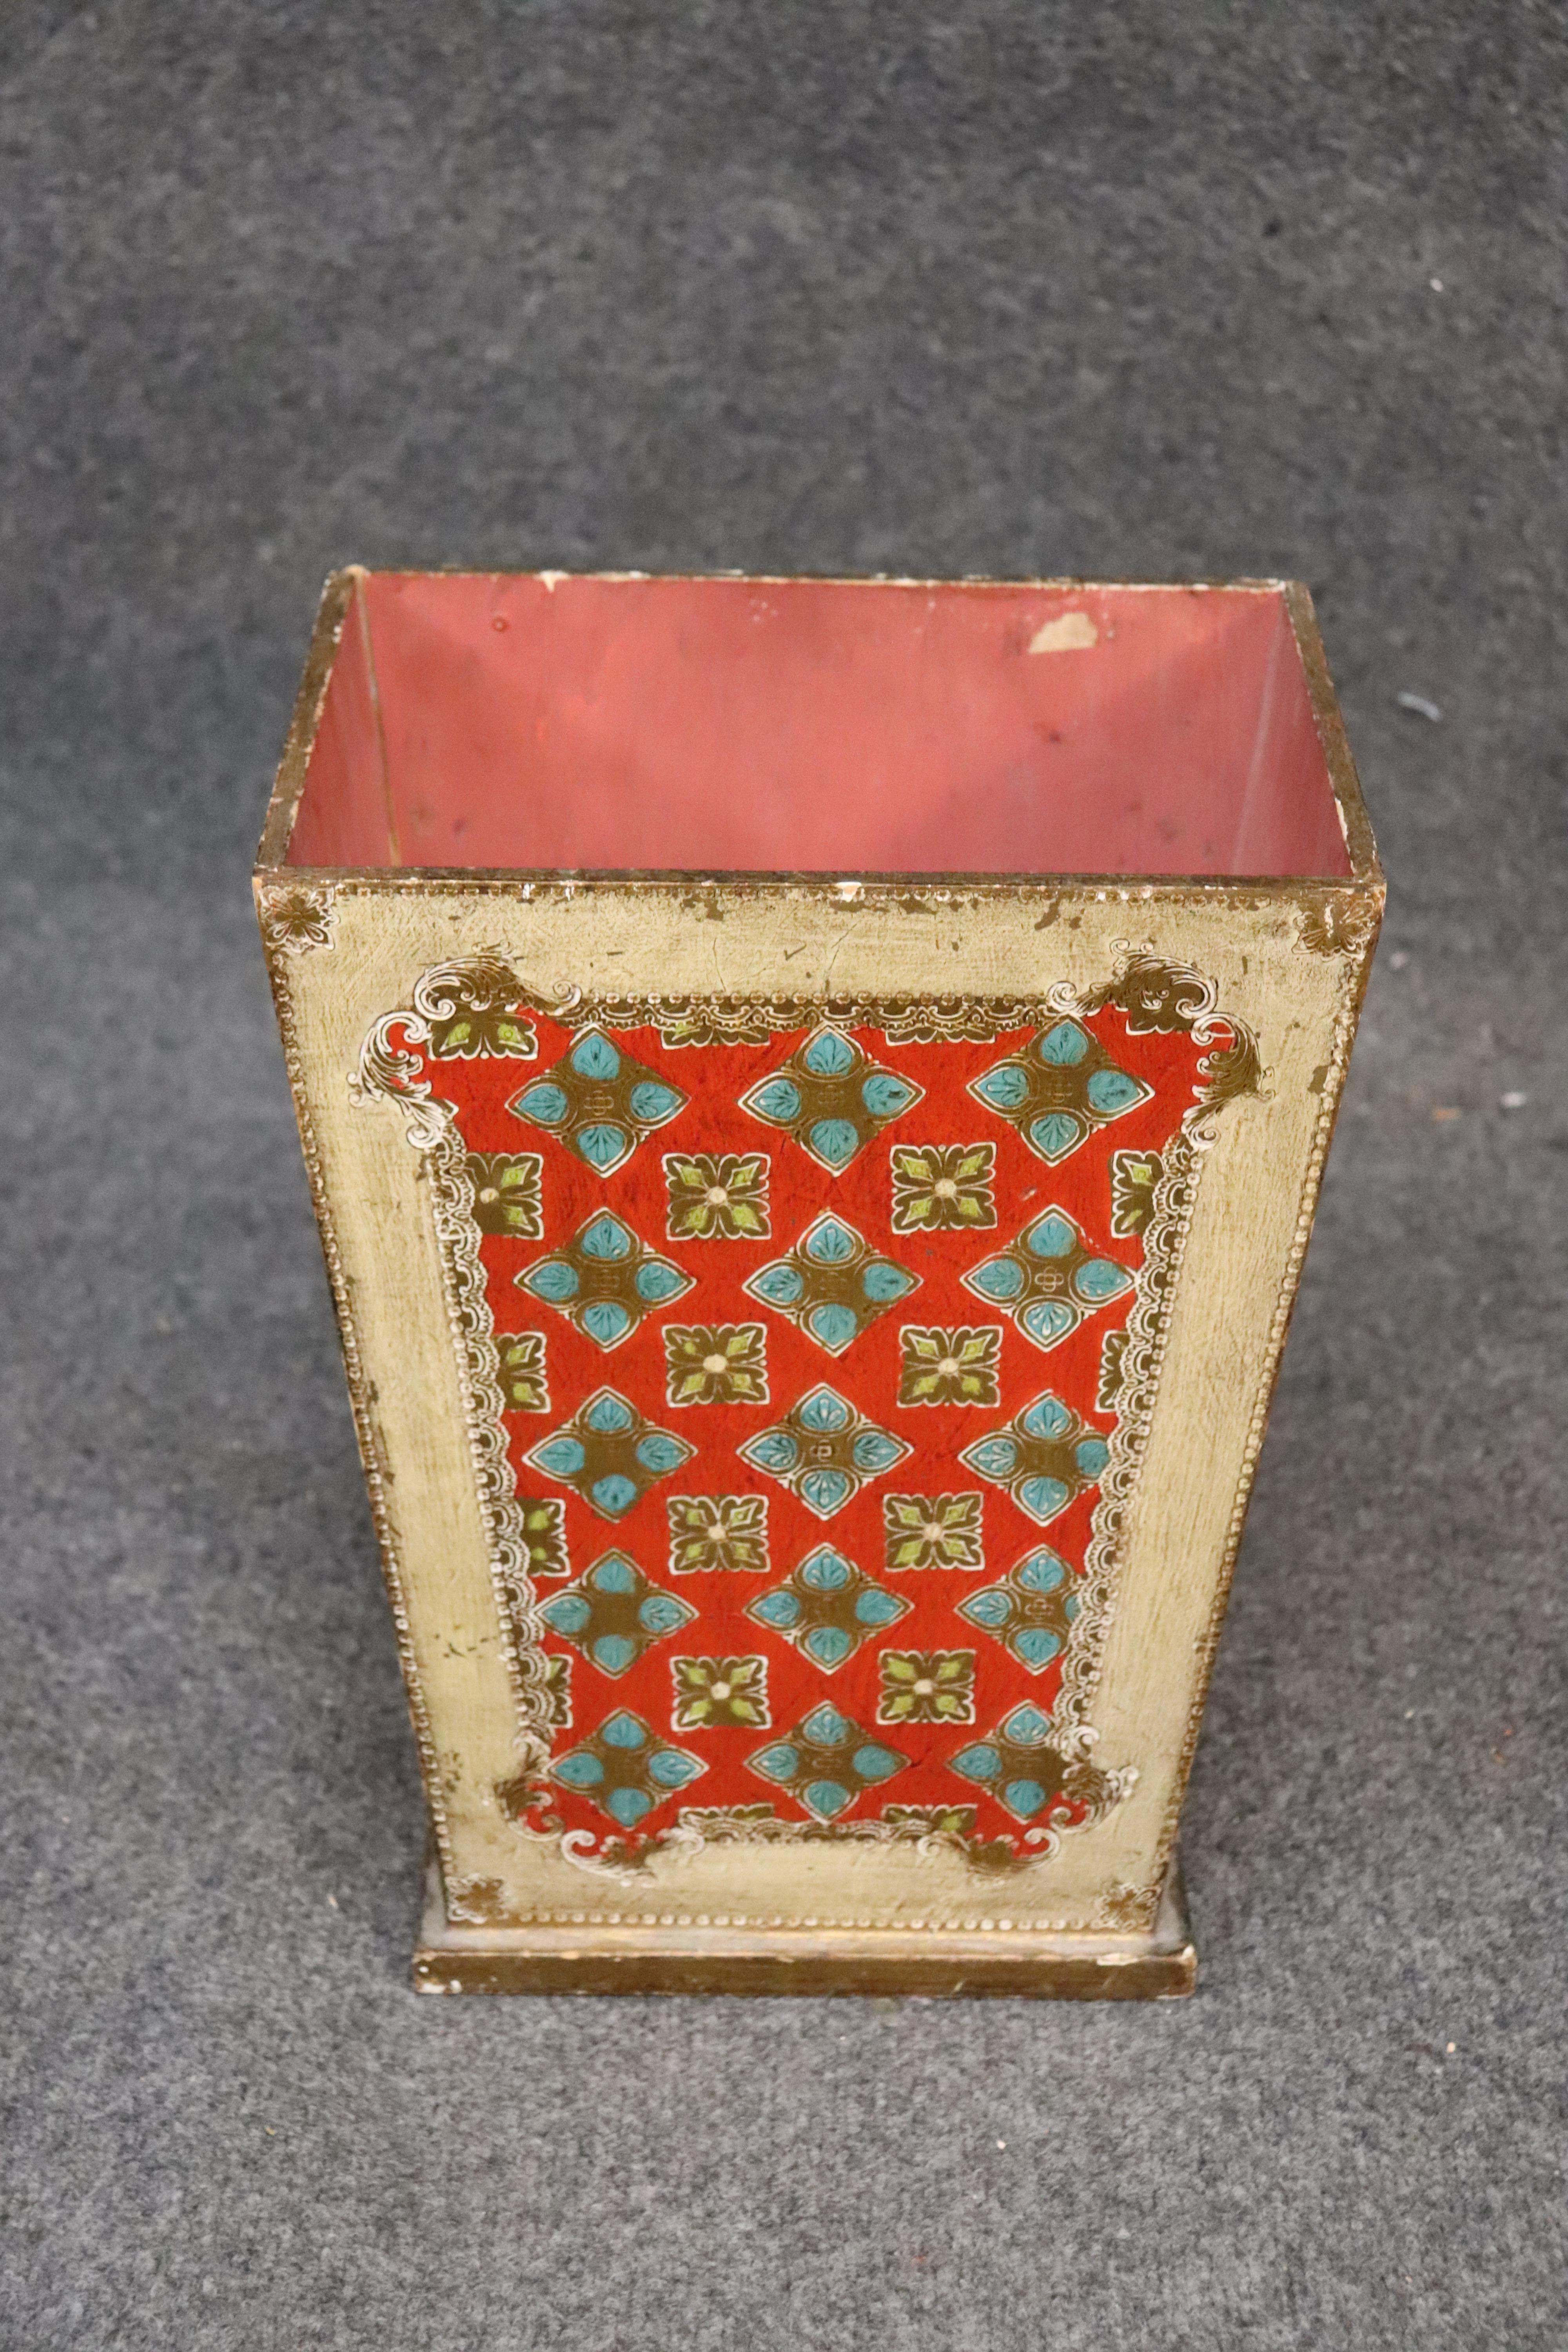 This is a gorgeous Florentine waste paper basket that is perfect for am office or even a powder room. The dimensions are 14 inches tall x 11 inches wide x 9 inches. Dates to the 1940s.